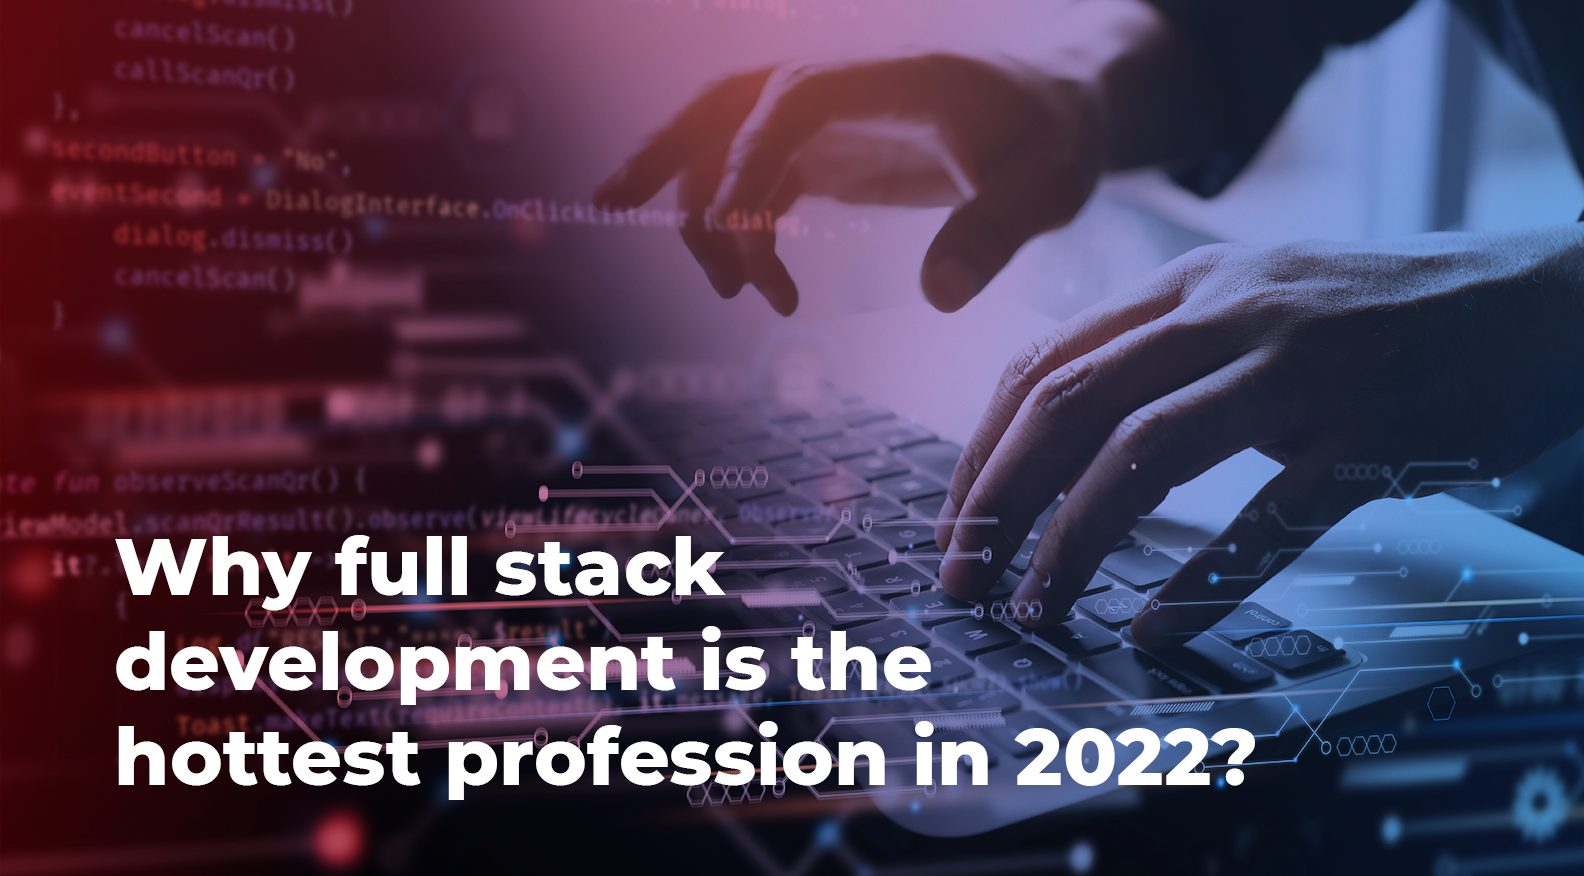 Why full stack development is the hottest profession in 2022?